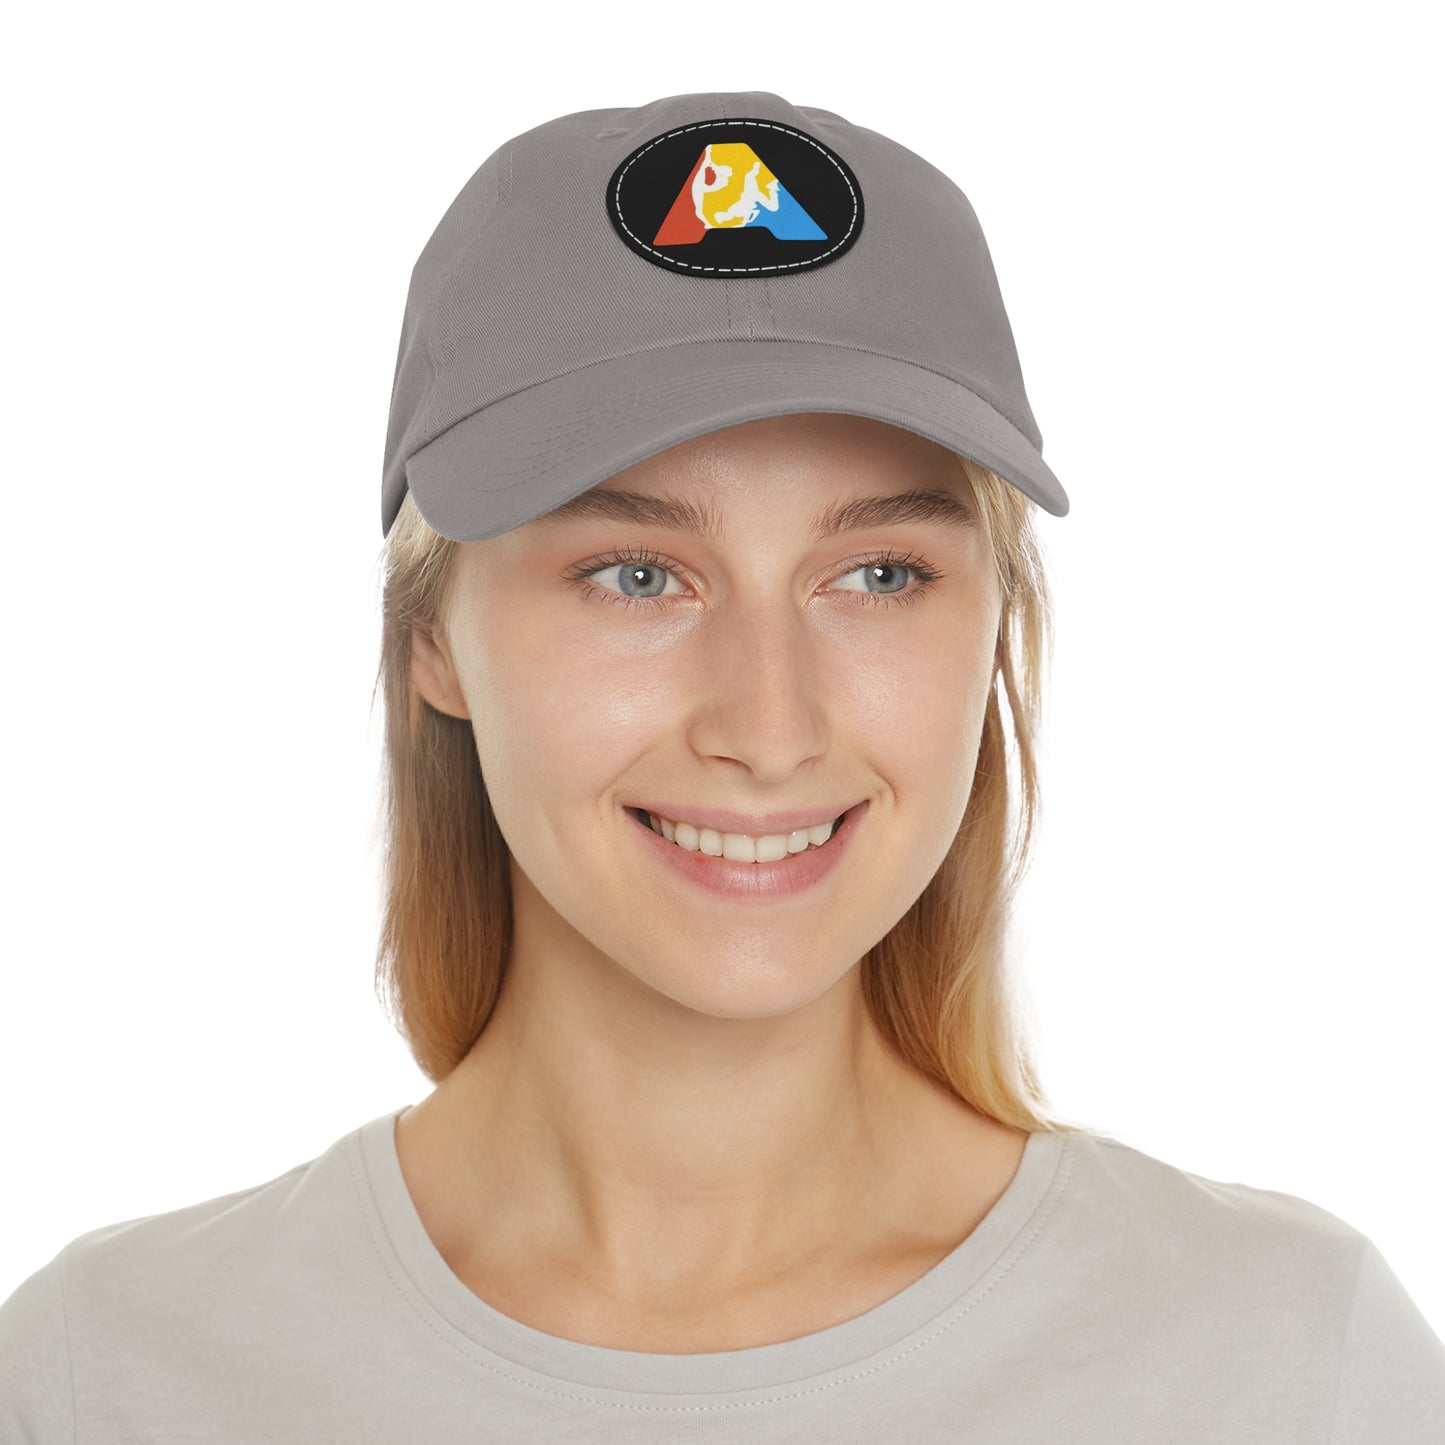 Mom&Dad Hat with Leather Patch (Round - logo imprimat) - Academia Campionilor suporter